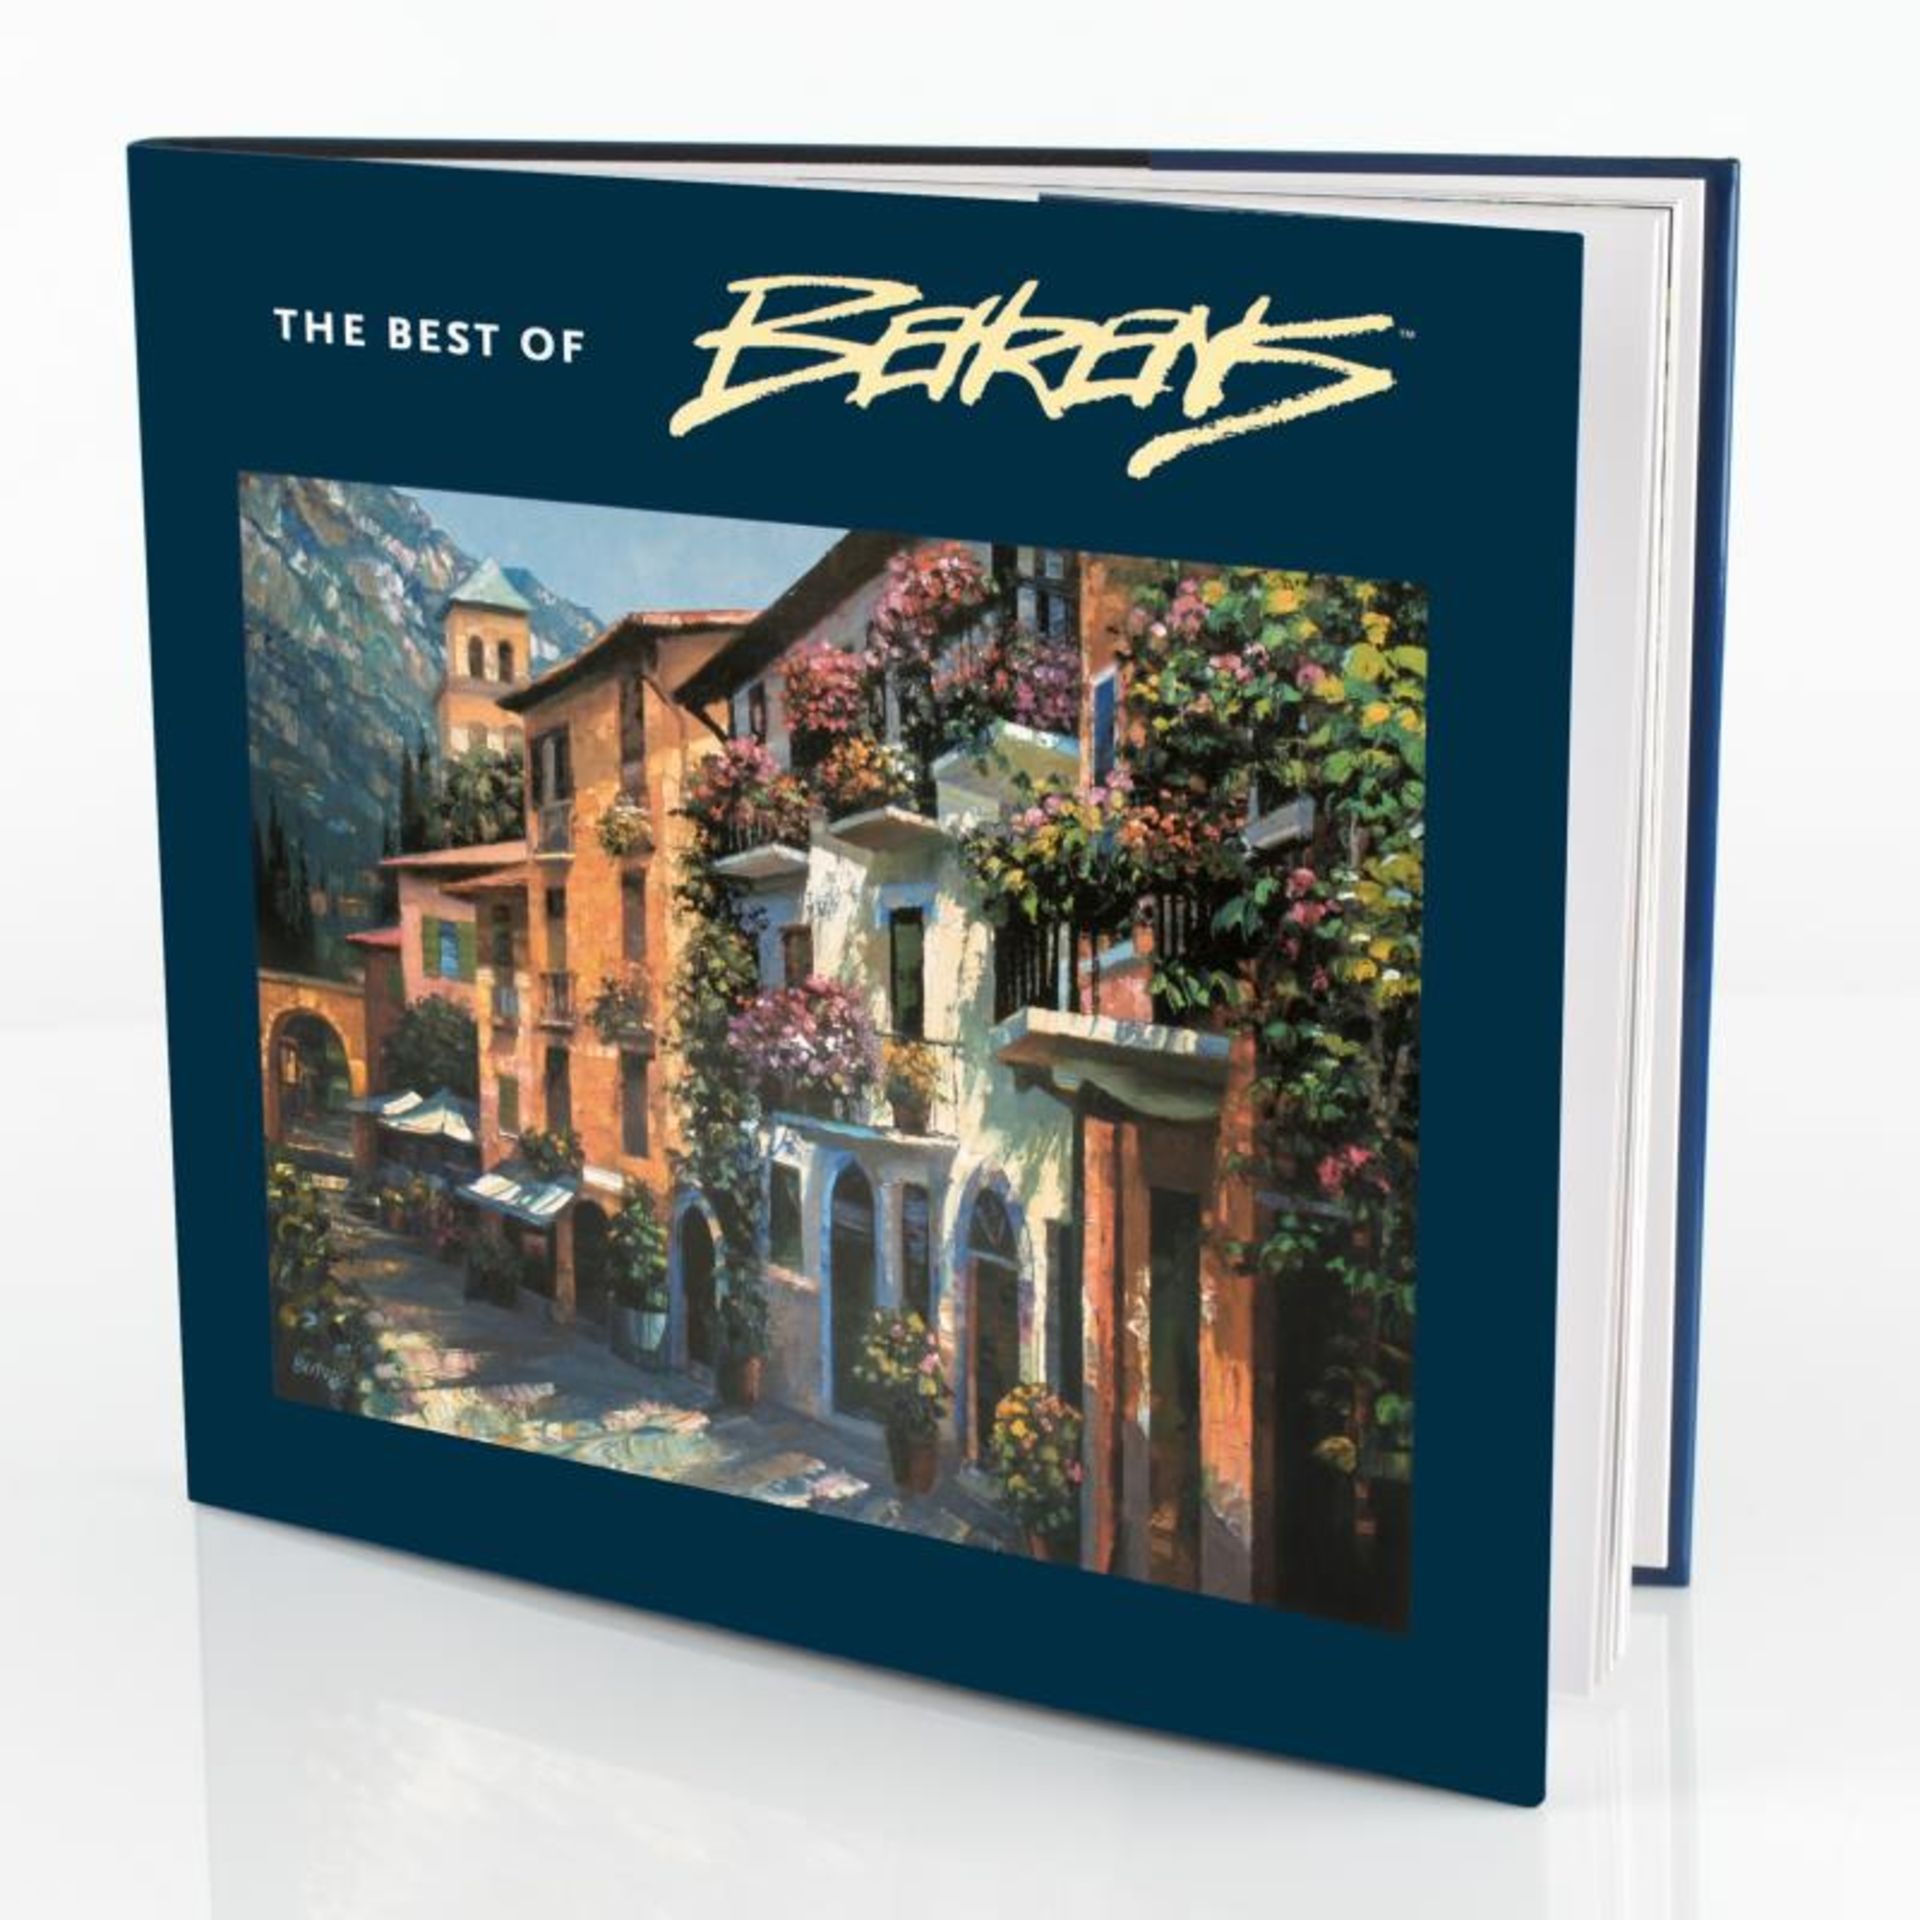 Howard Behrens (1933-2014), "The Best of Behrens" is a Coffee-Table Book Publish